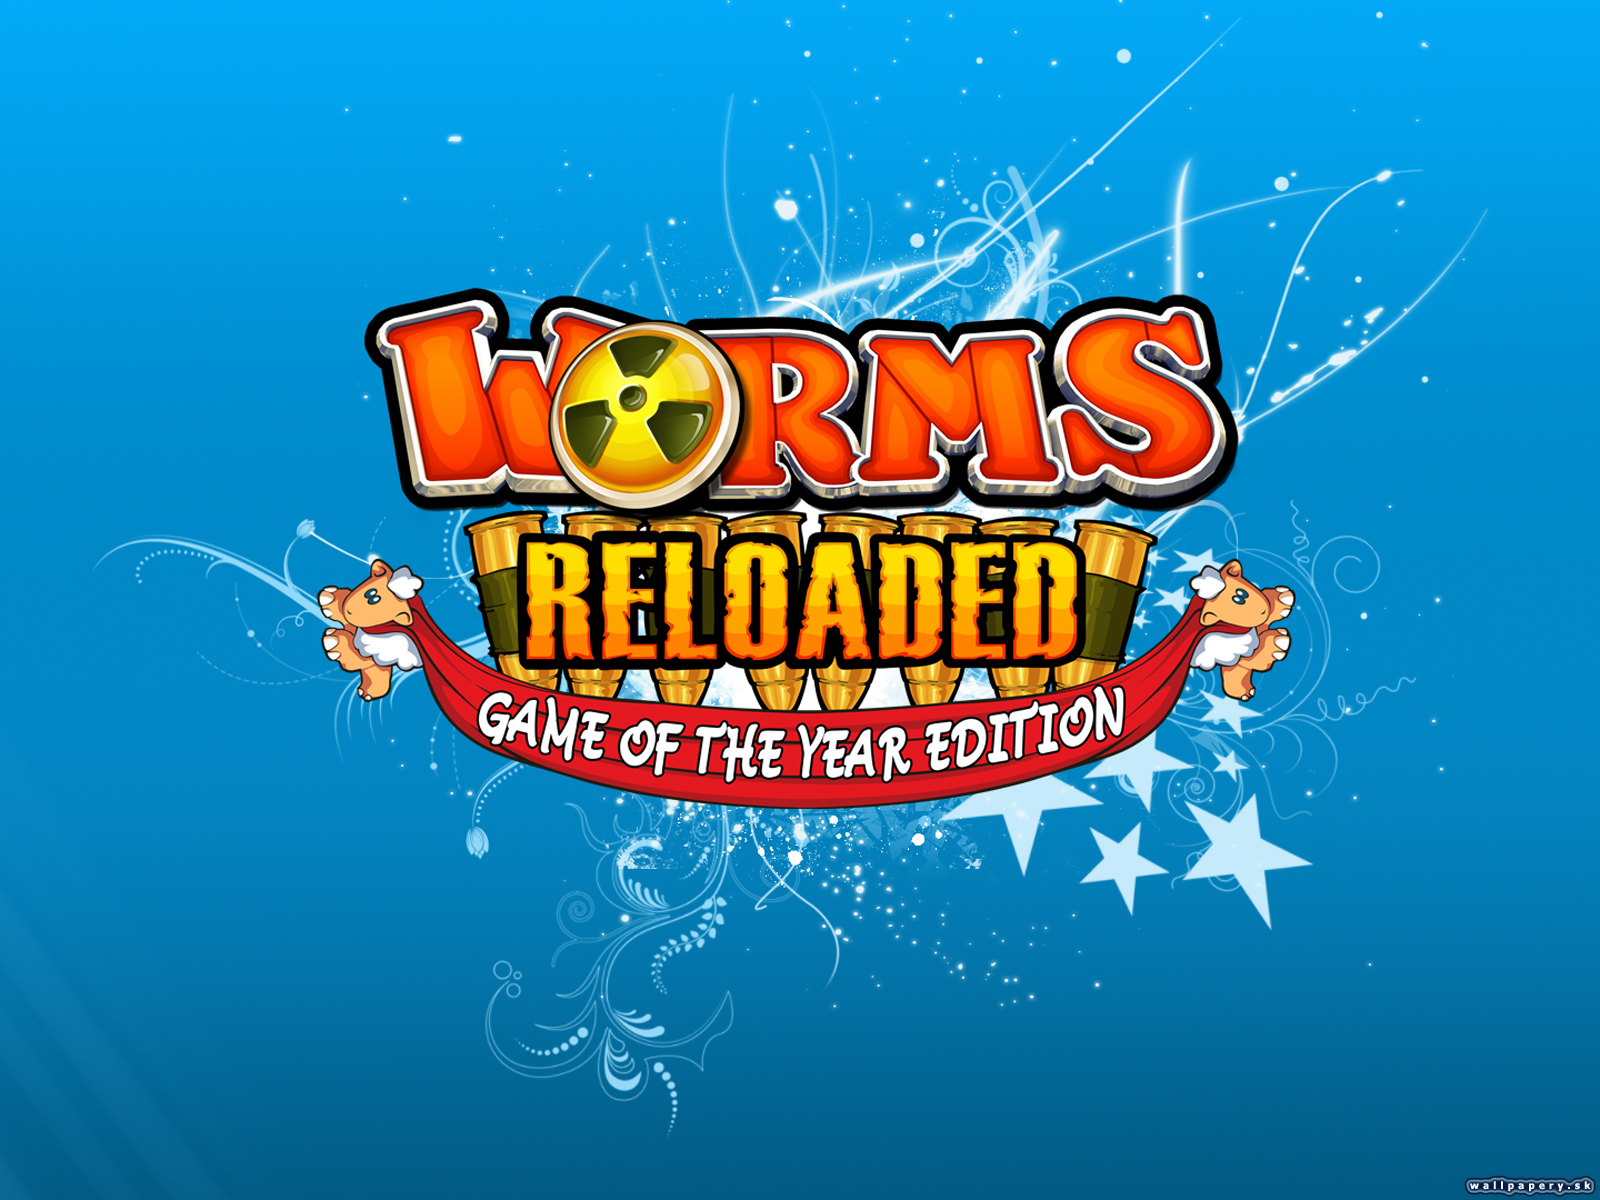 Worms Reloaded: Game of the Year Edition - wallpaper 2